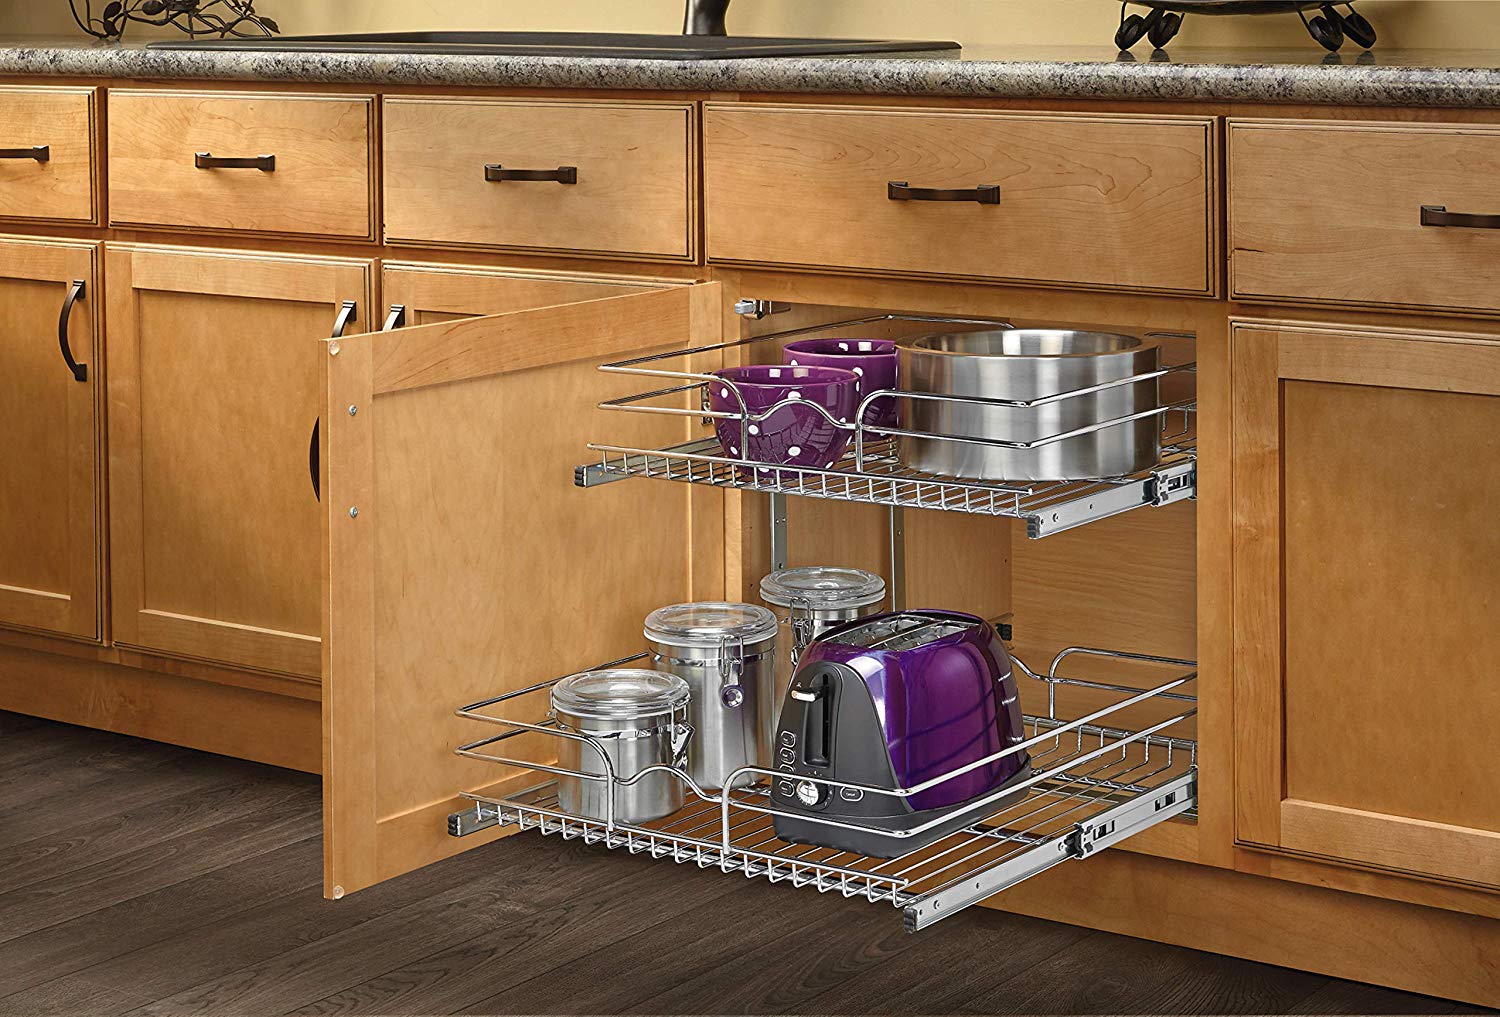 30 WAYS TO CREATE EXTRA STORAGE SPACE IN A SMALL KITCHEN Comfort